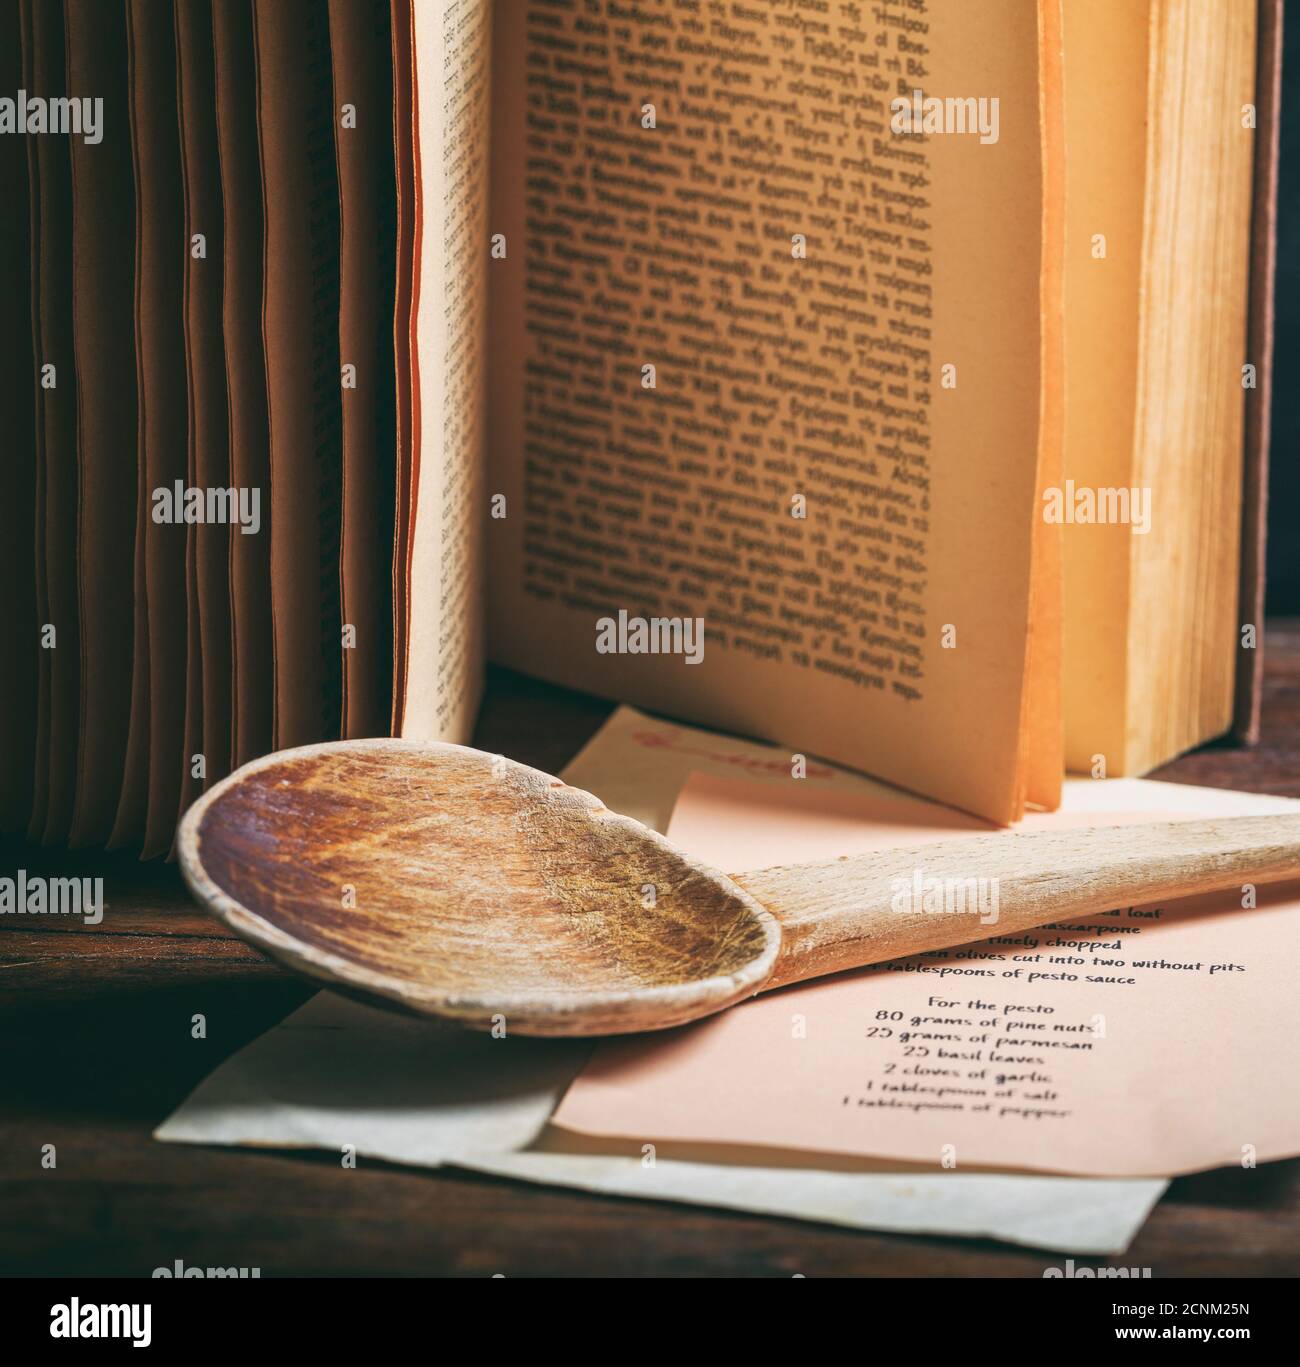 https://c8.alamy.com/comp/2CNM25N/cooking-recipe-book-on-wooden-table-background-old-vintage-cookbook-and-wooden-ladle-closeup-view-vertical-2CNM25N.jpg